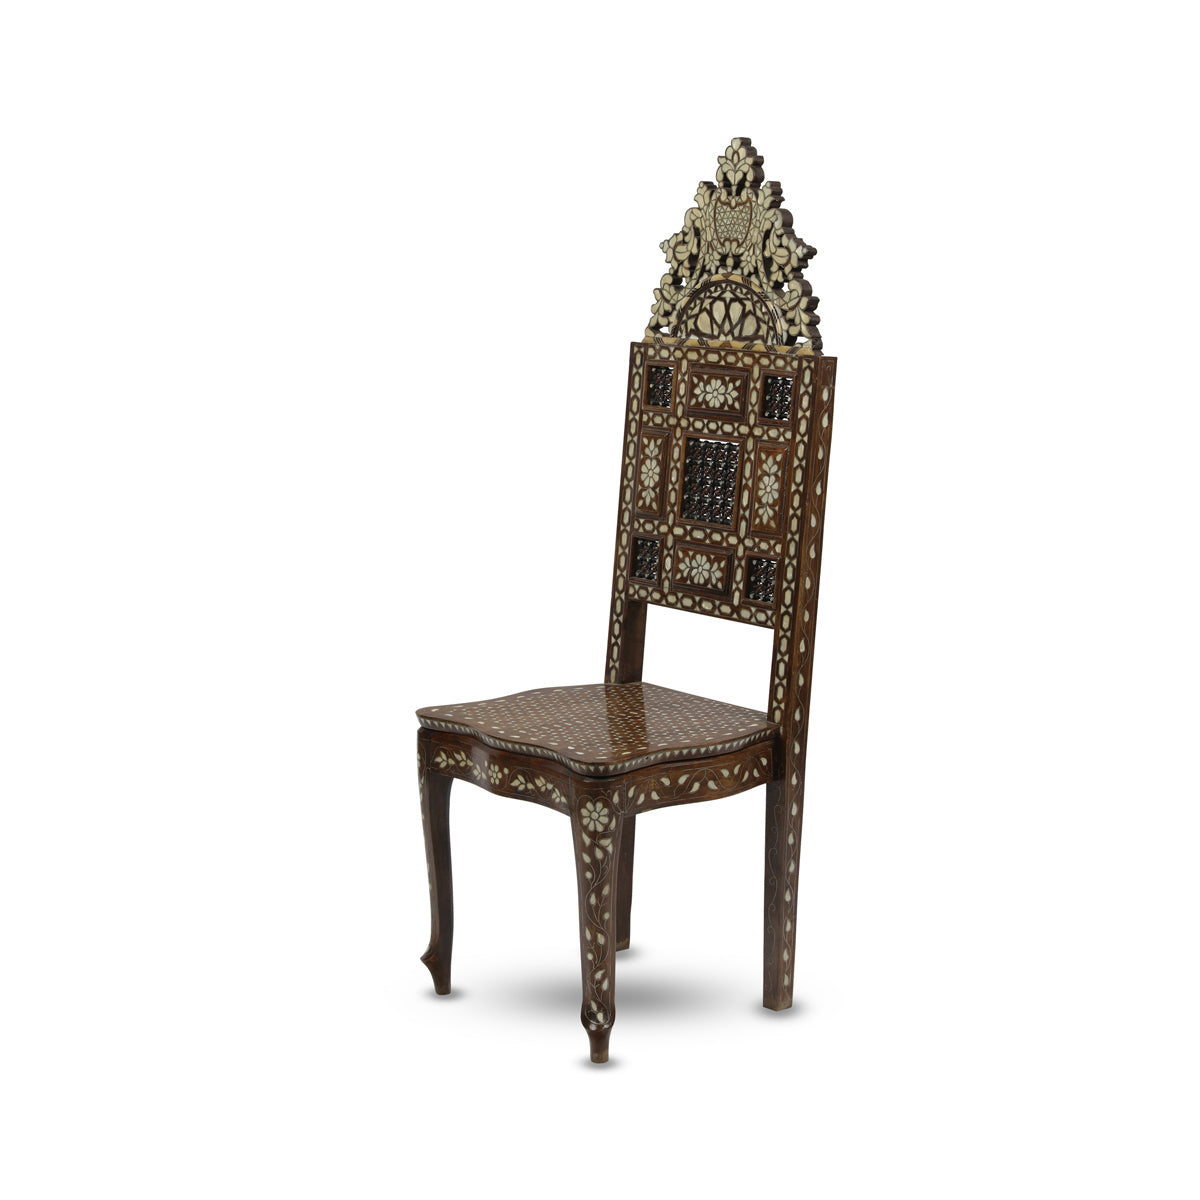 Angled Side View of Mother of Pearl Inlaid Syrian Flat Seater Chair